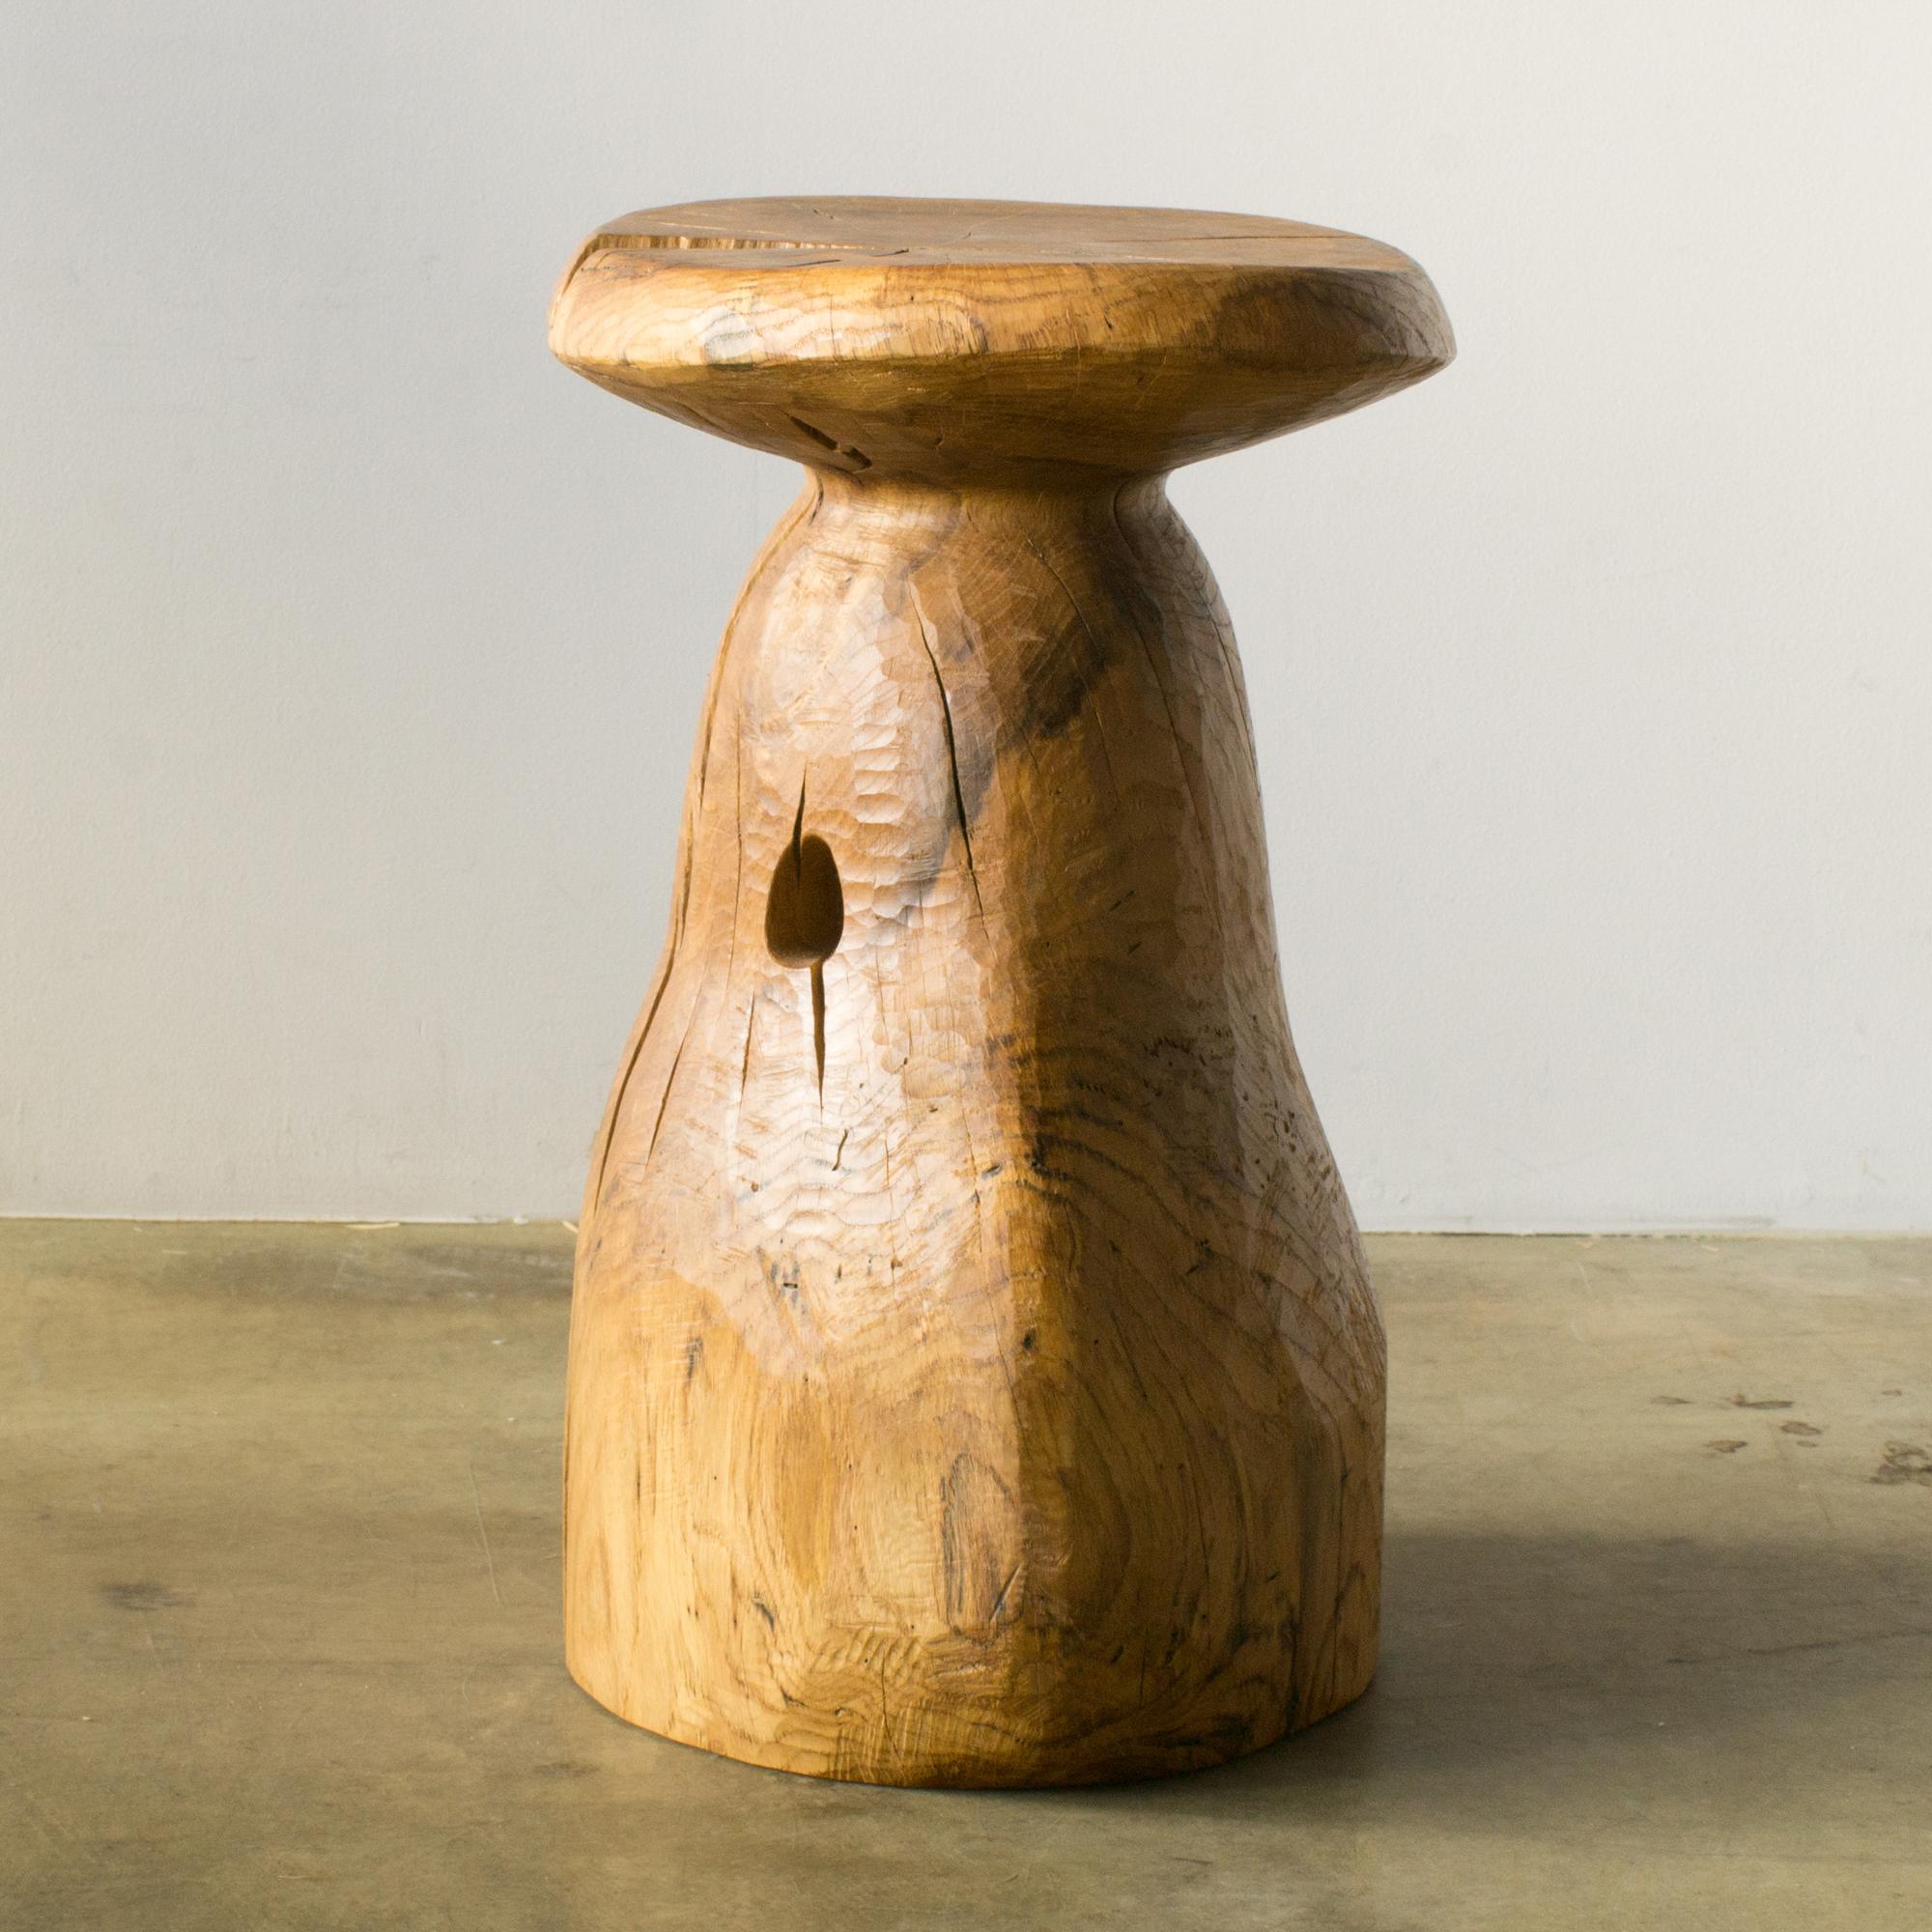 Name: Mountain Cave
Sculptural stool by Hiroyuki Nishimura and zone carved furniture
Material: Oak
This work is carved from log with some kinds of chainsaws.
Most of wood used for Nishimura's works are unable to use anything, these woods are